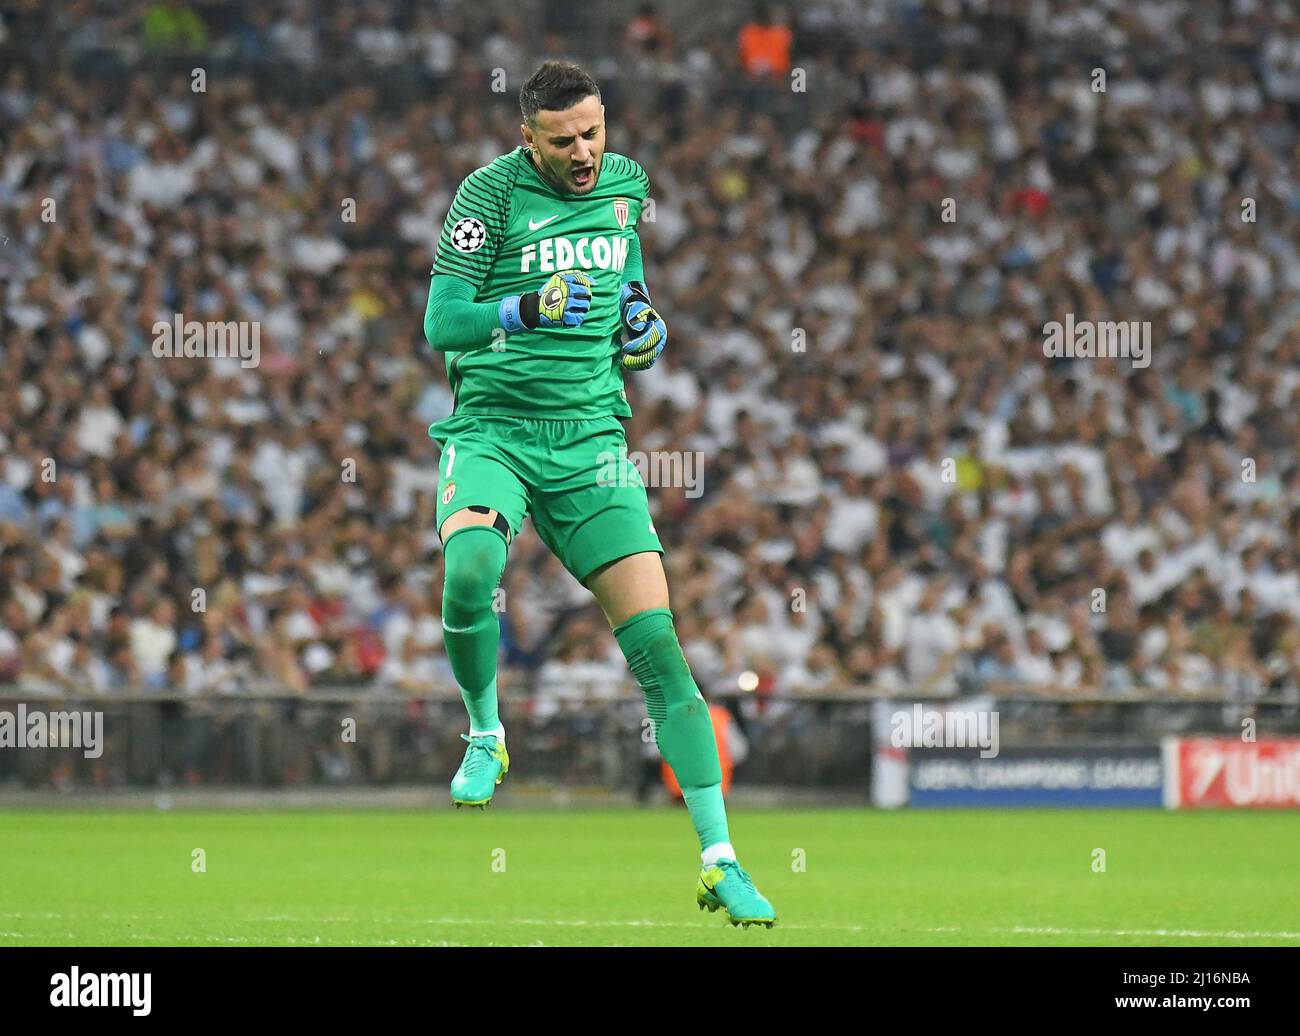 MANCHESTER, ENGLAND - SEPTEMBER 14, 2016: Monaco goalkeeper Danijel Subasic celebrates after a goal scored by his team during the UEFA Champions League Group E game between Tottenham Hotspur and AS Monaco at Wembley Stadium. Copyright: Cosmin Iftode/Picstaff Stock Photo